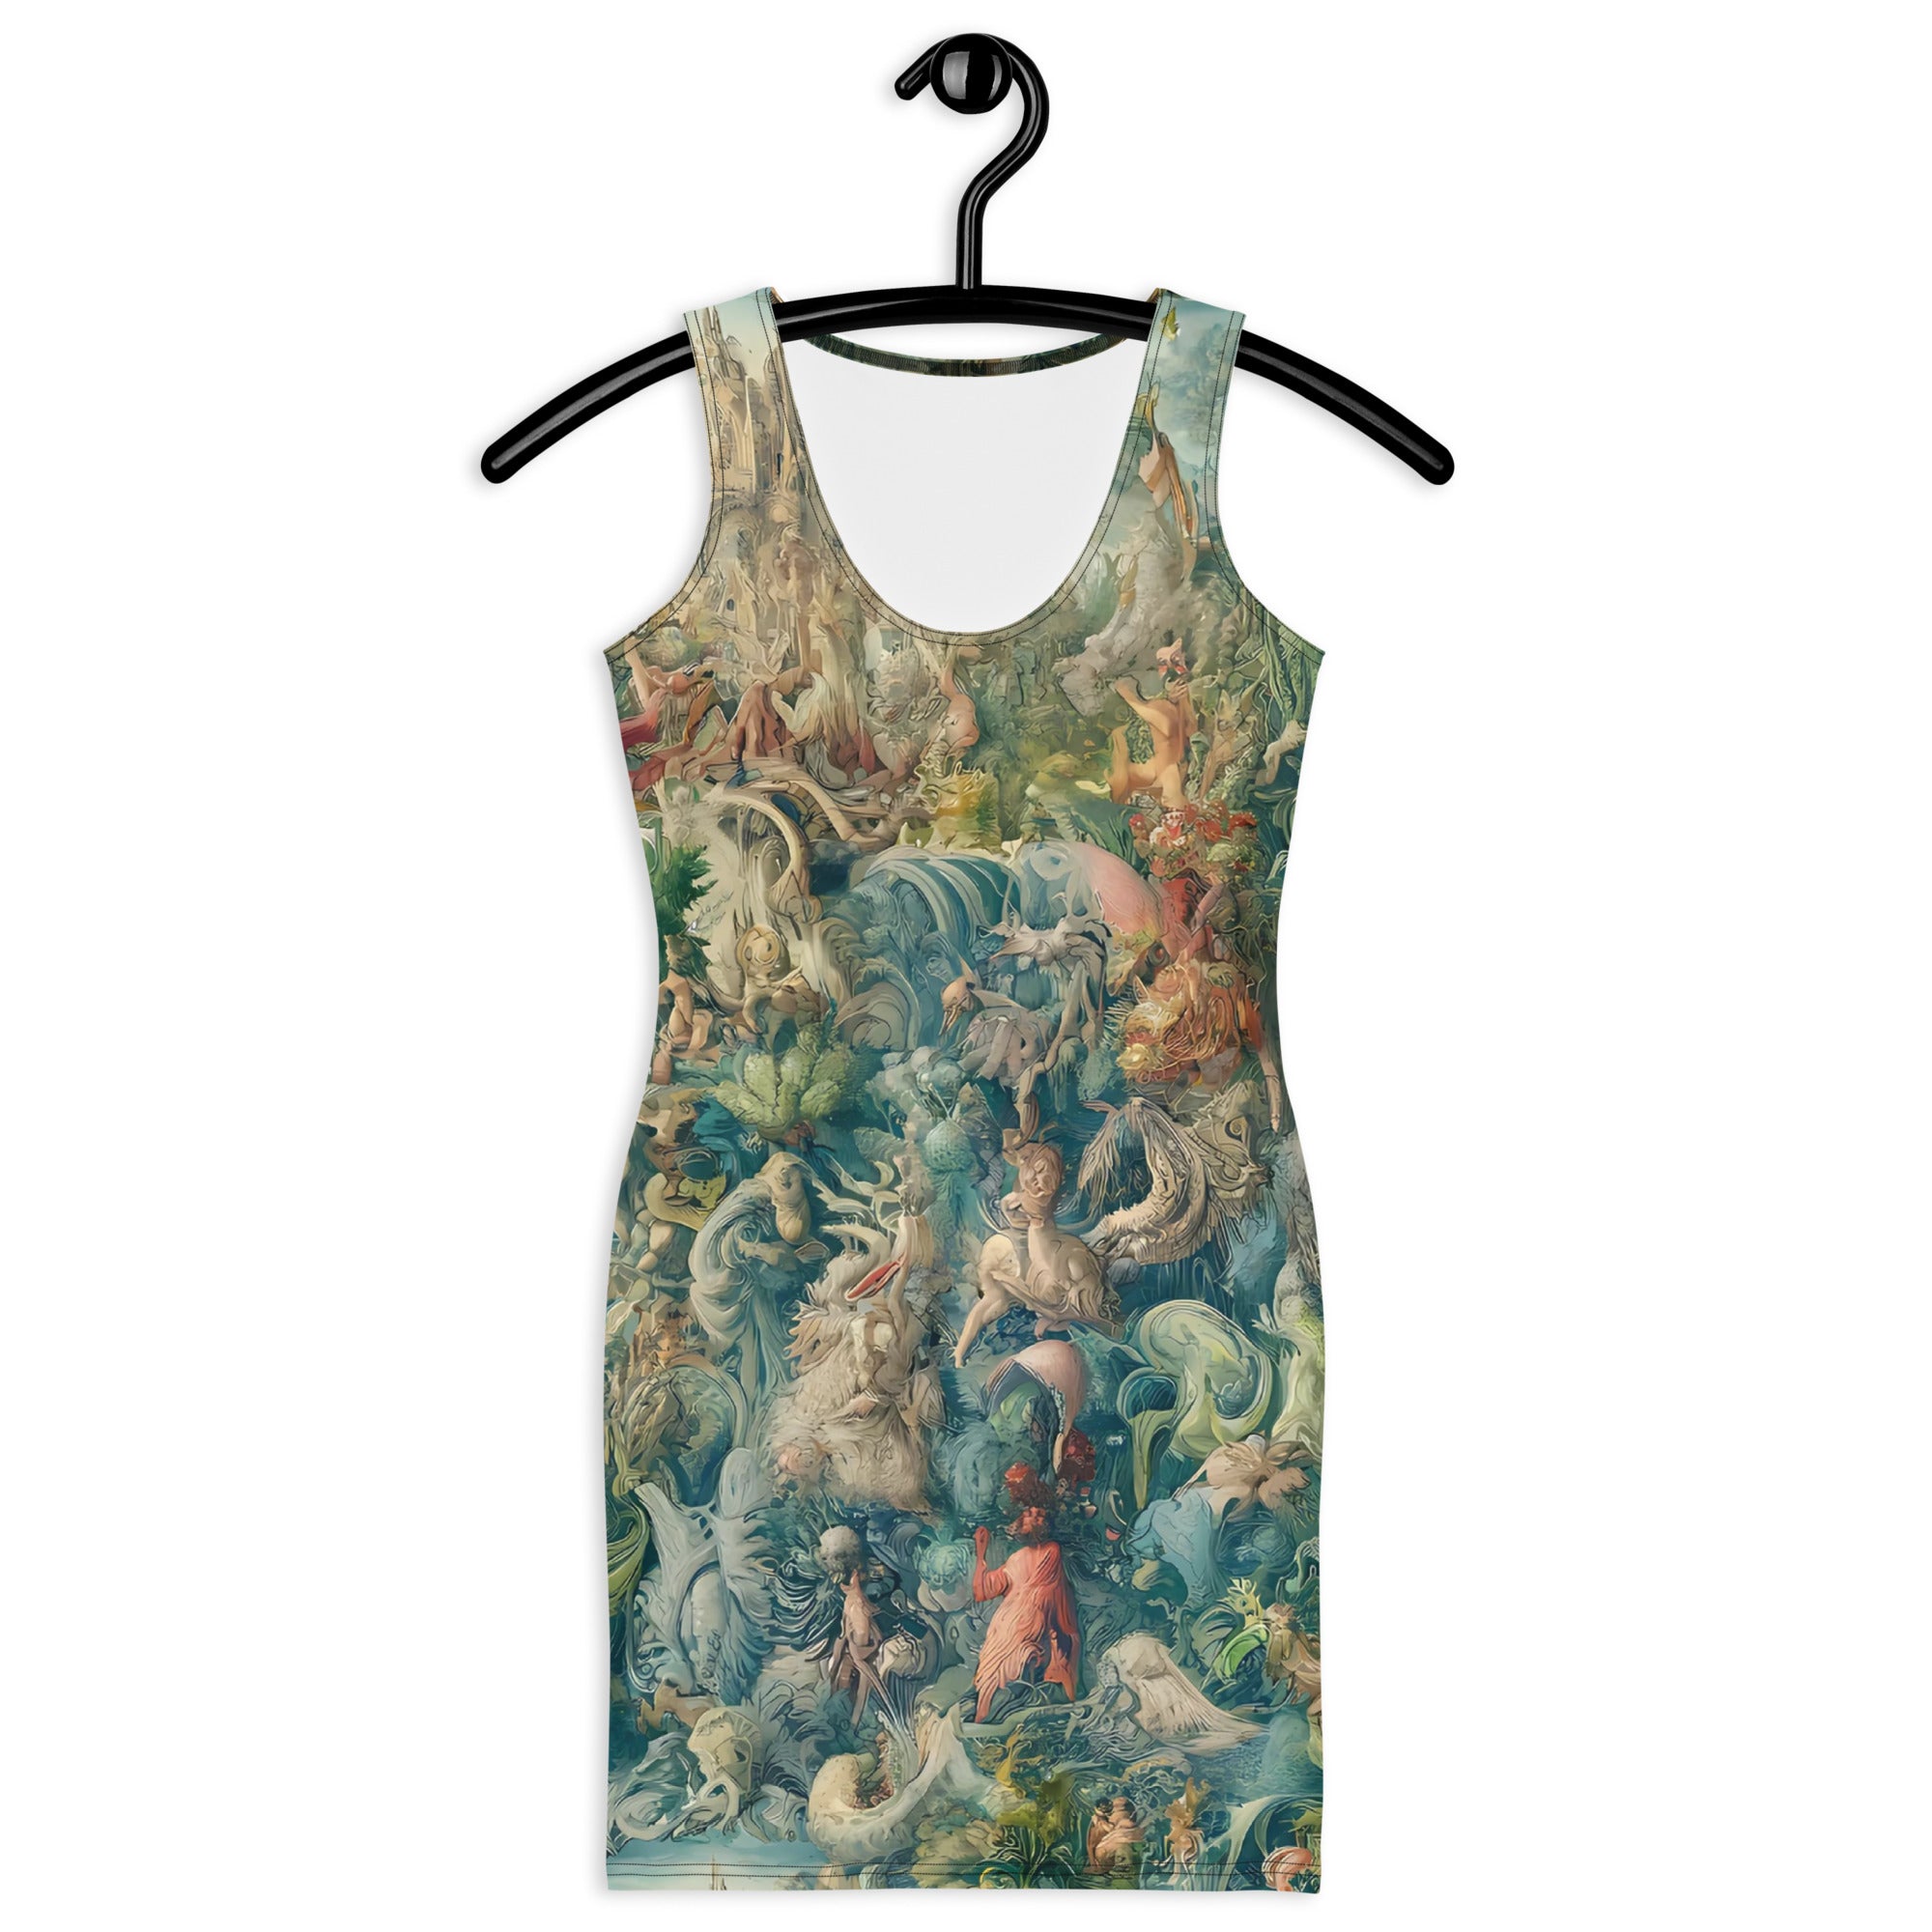 Hieronymus Bosch 'The Garden of Earthly Delights' Famous Painting Bodycon Dress | Premium Art Dress